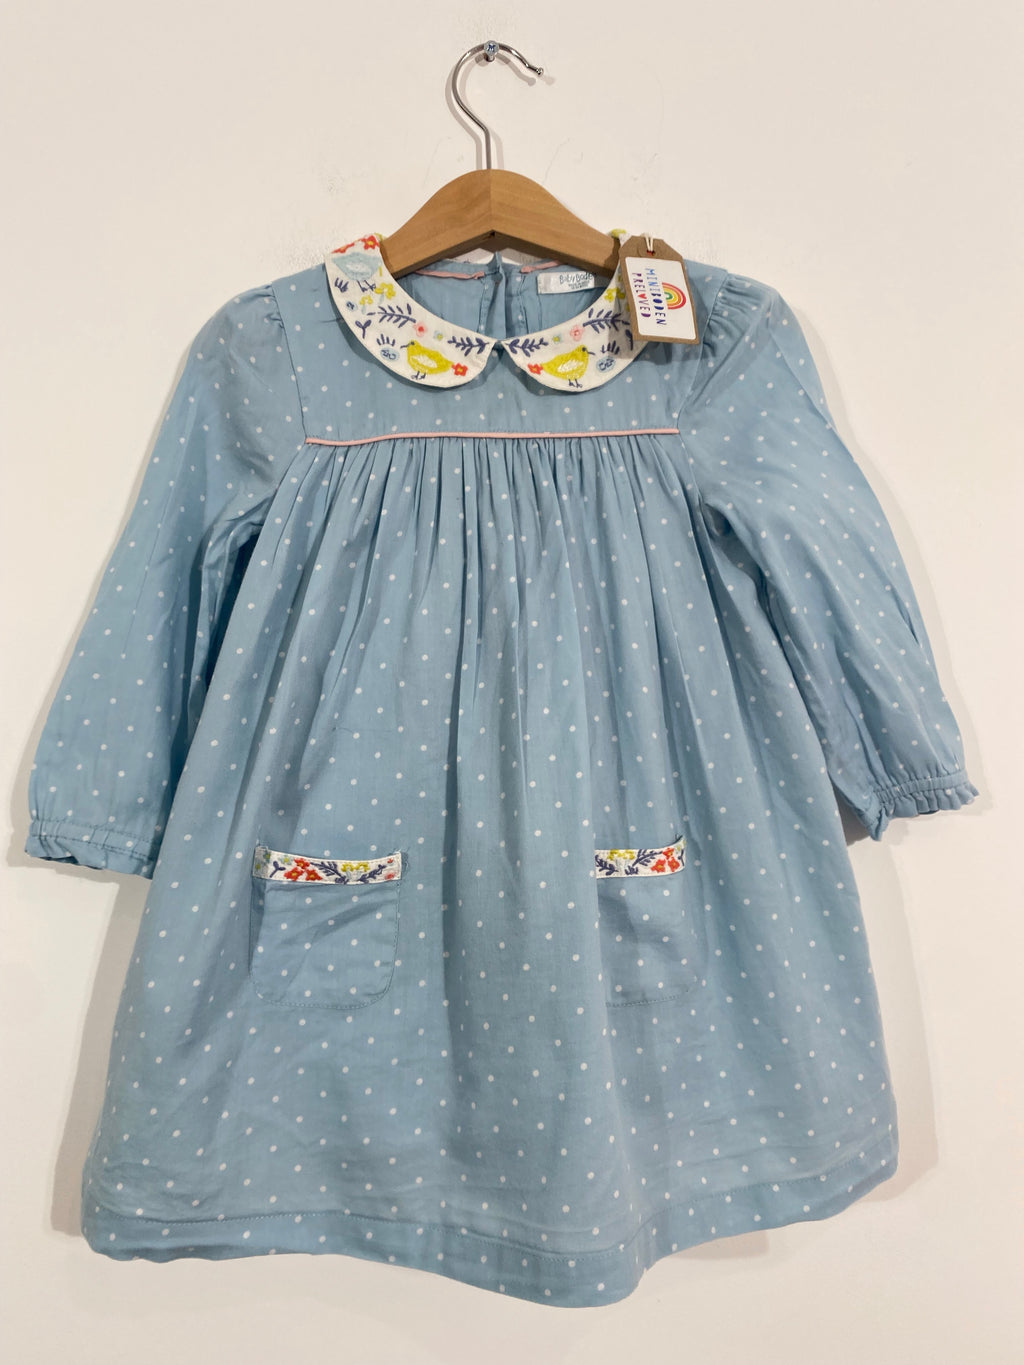 Beautiful Blue Polka Dot Floral Dress With Embroidered Chicks Collar (18-24 Months)